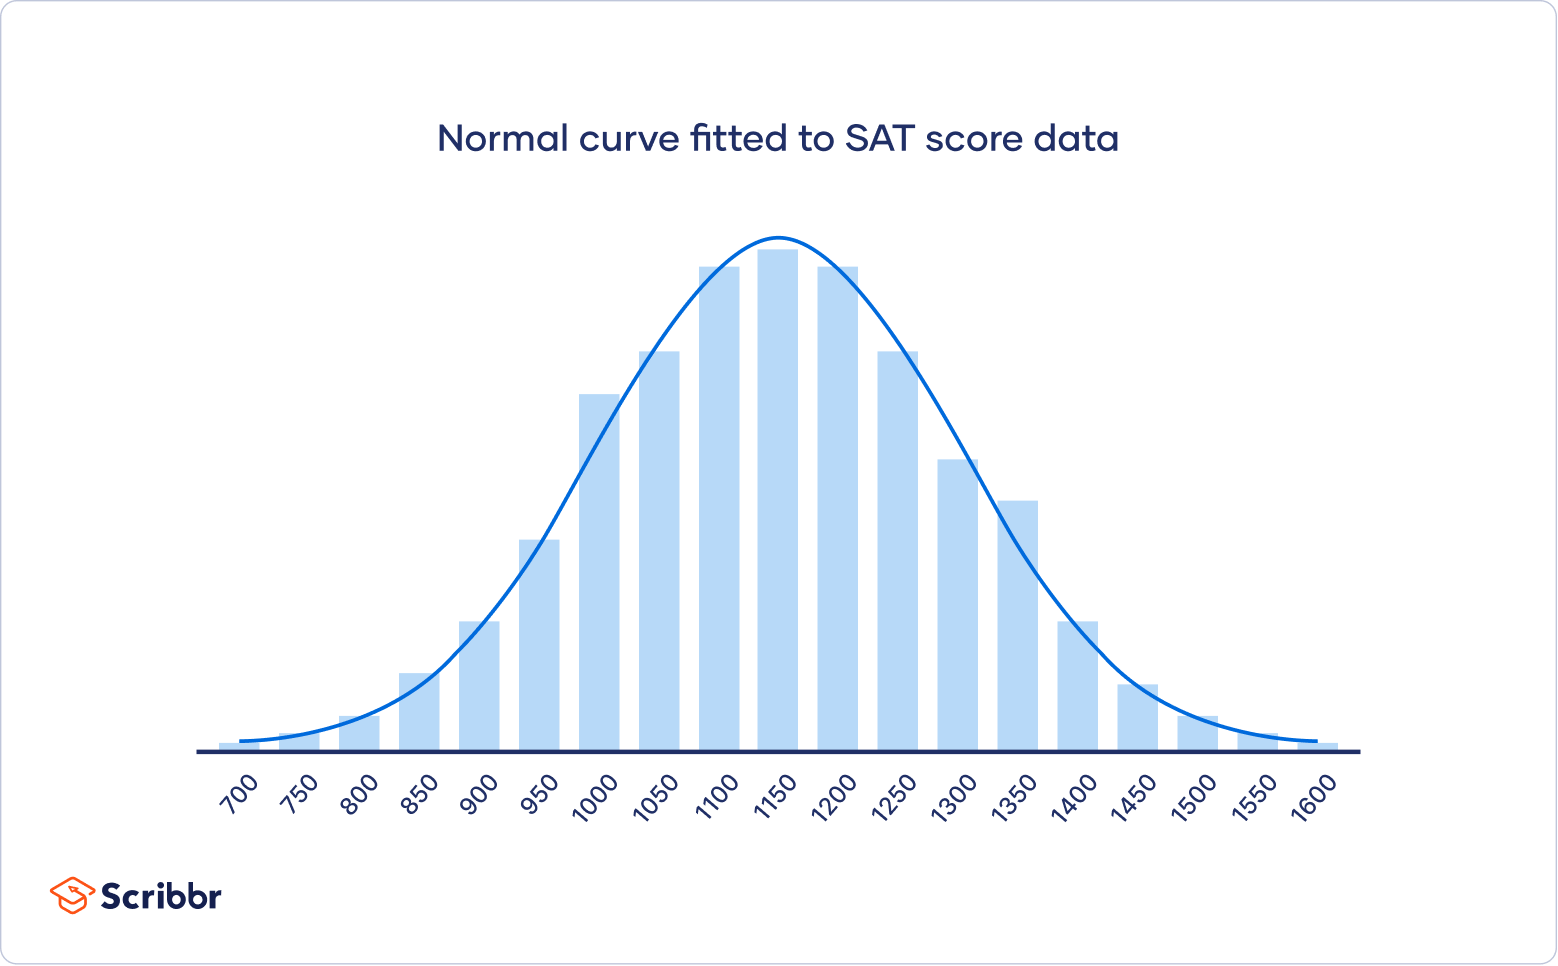 A normal curve fitted to a normal distribution of SAT scores